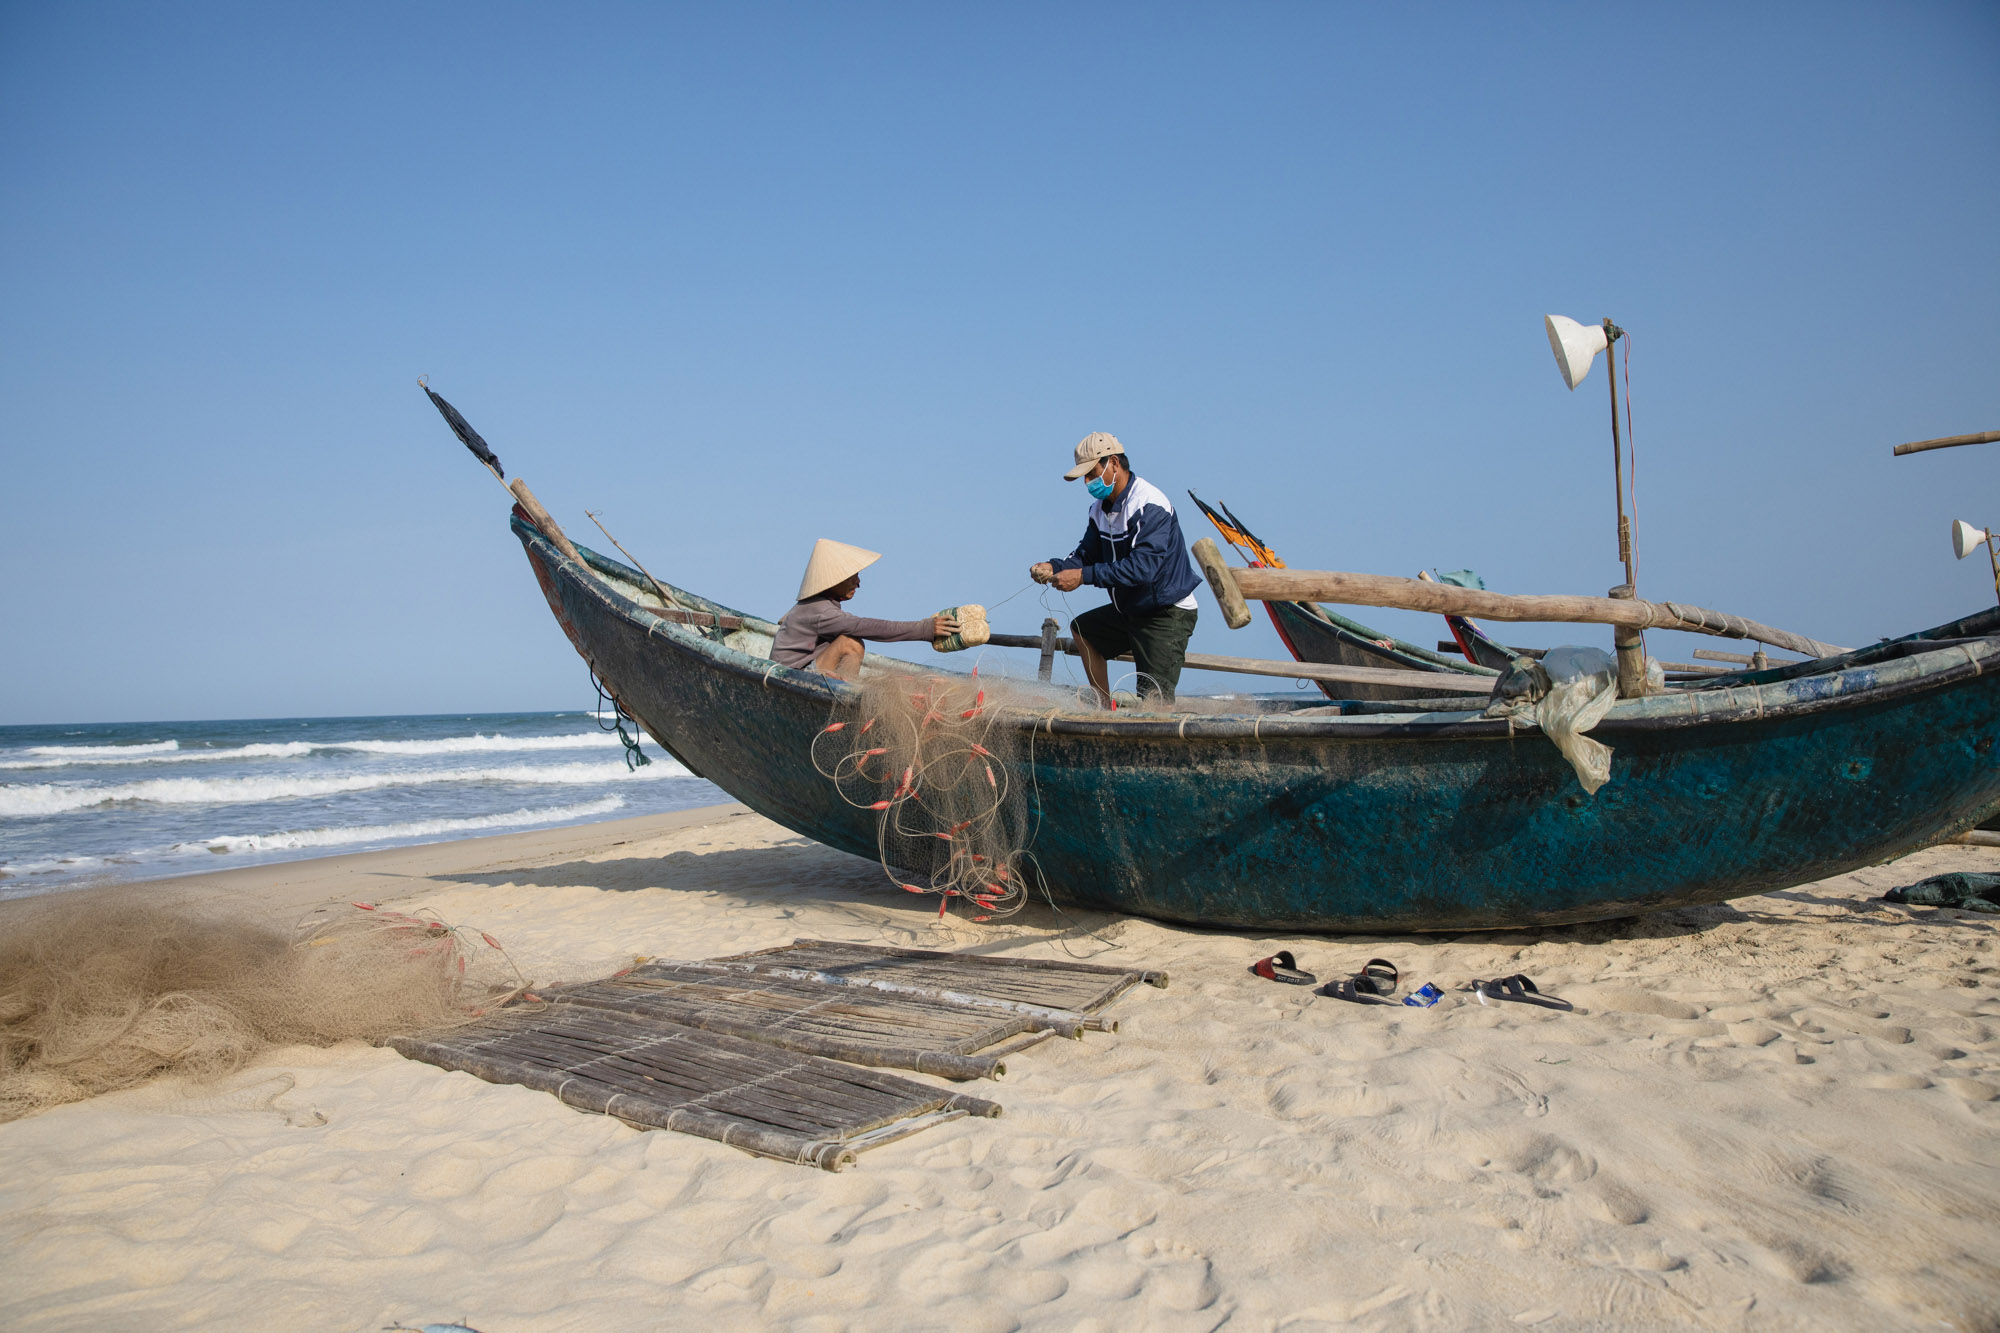 Tam Thanh fishing villages - Culture in Hoi An and Quang Nam